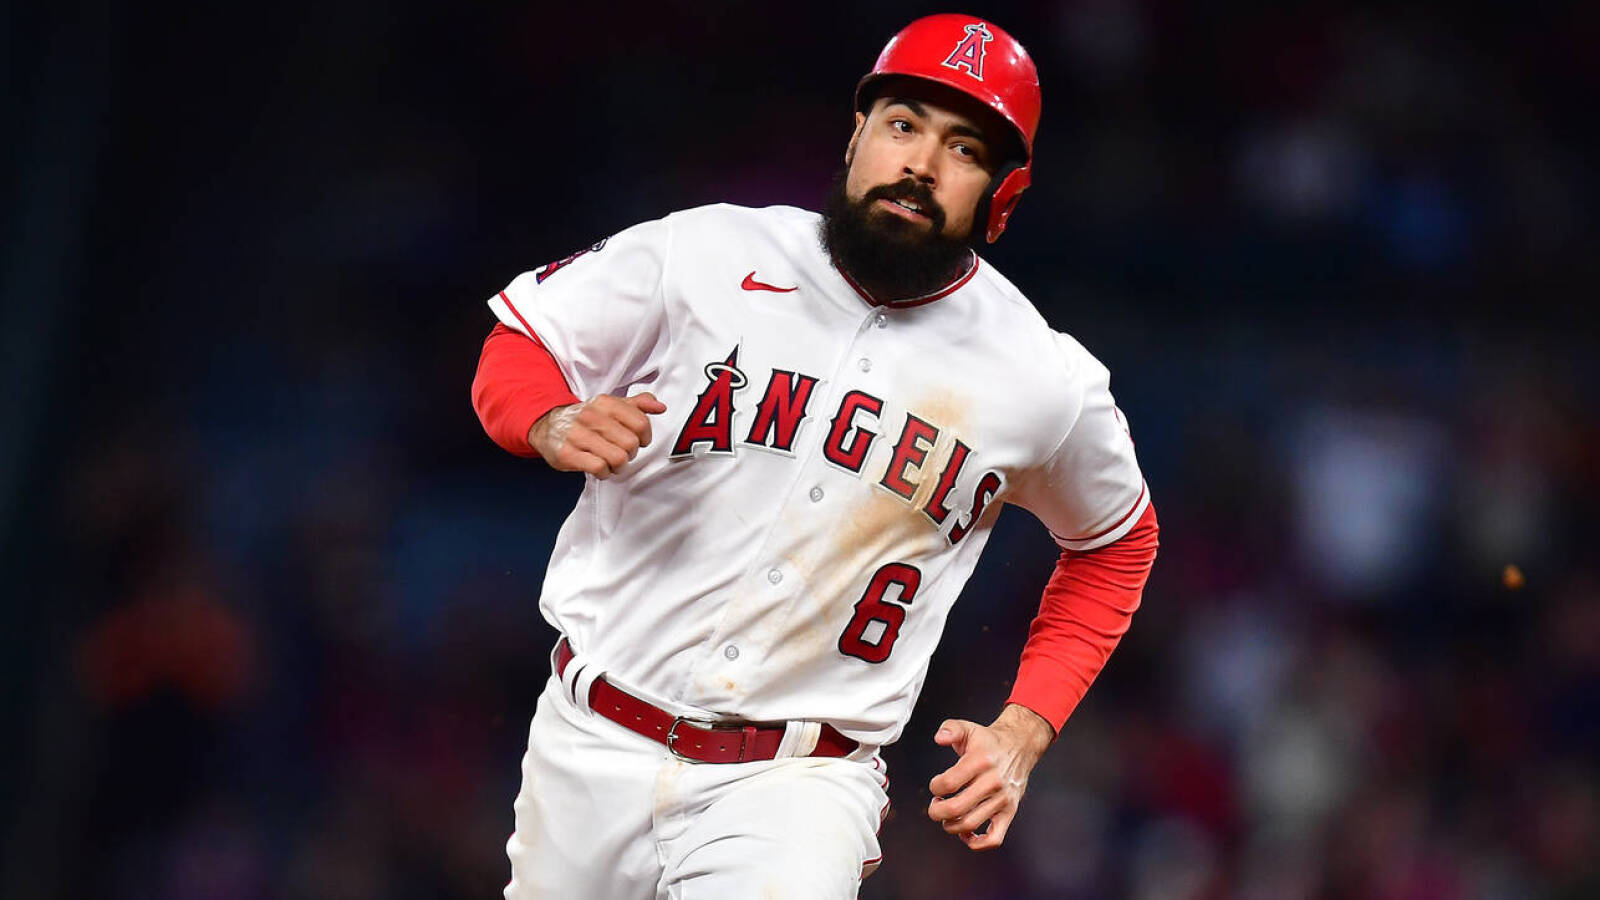 Latest comments from Angels 3B may infuriate fans